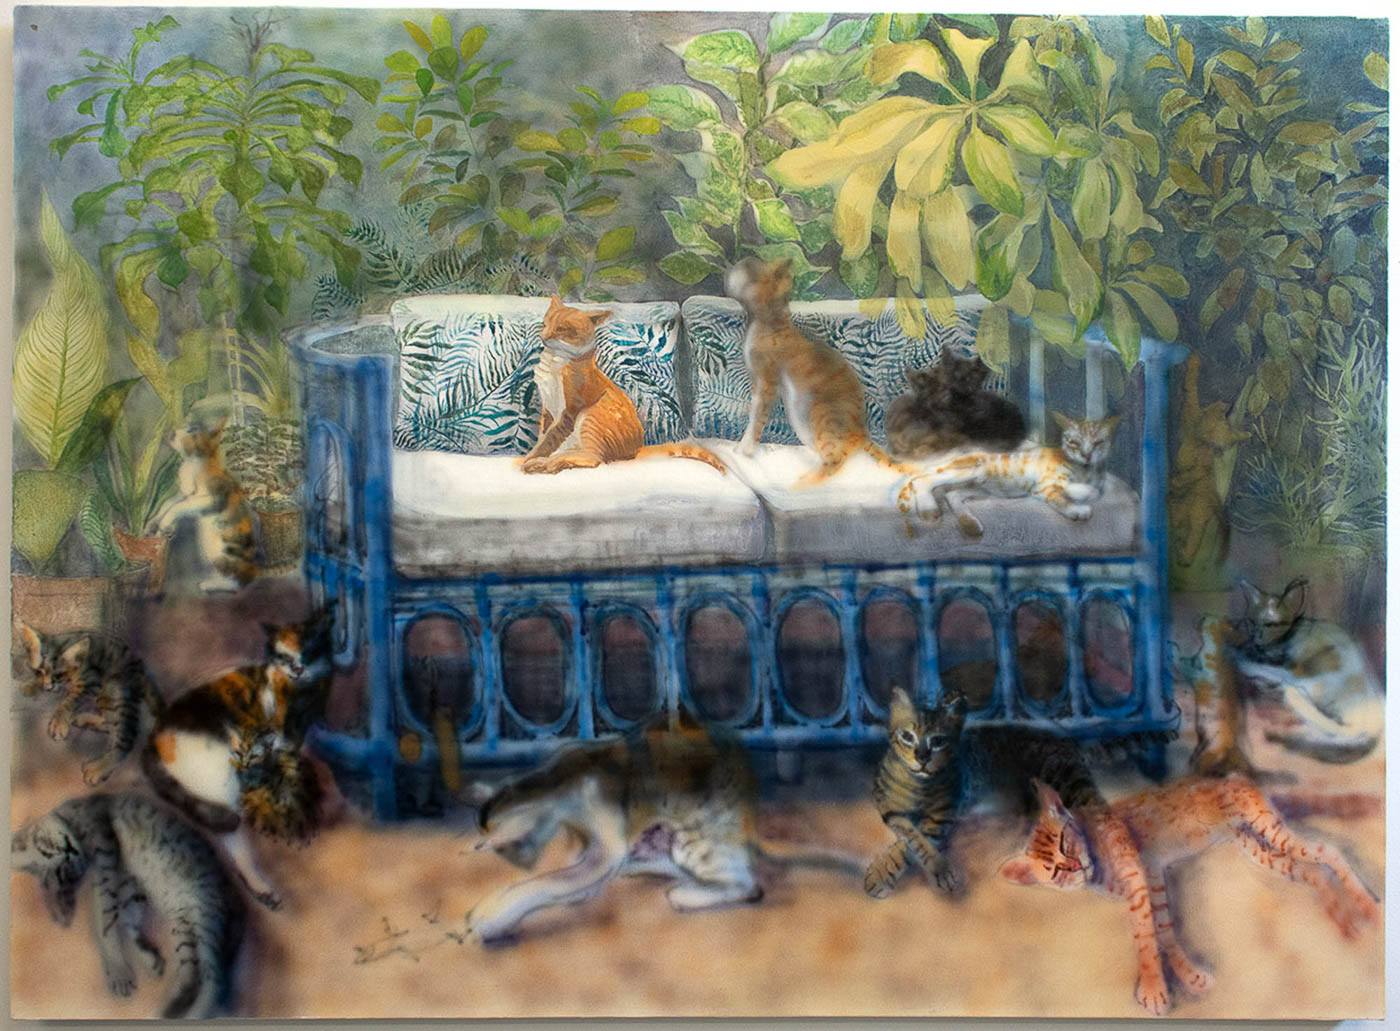 A painting of cats on and around a couch in a botanical setting